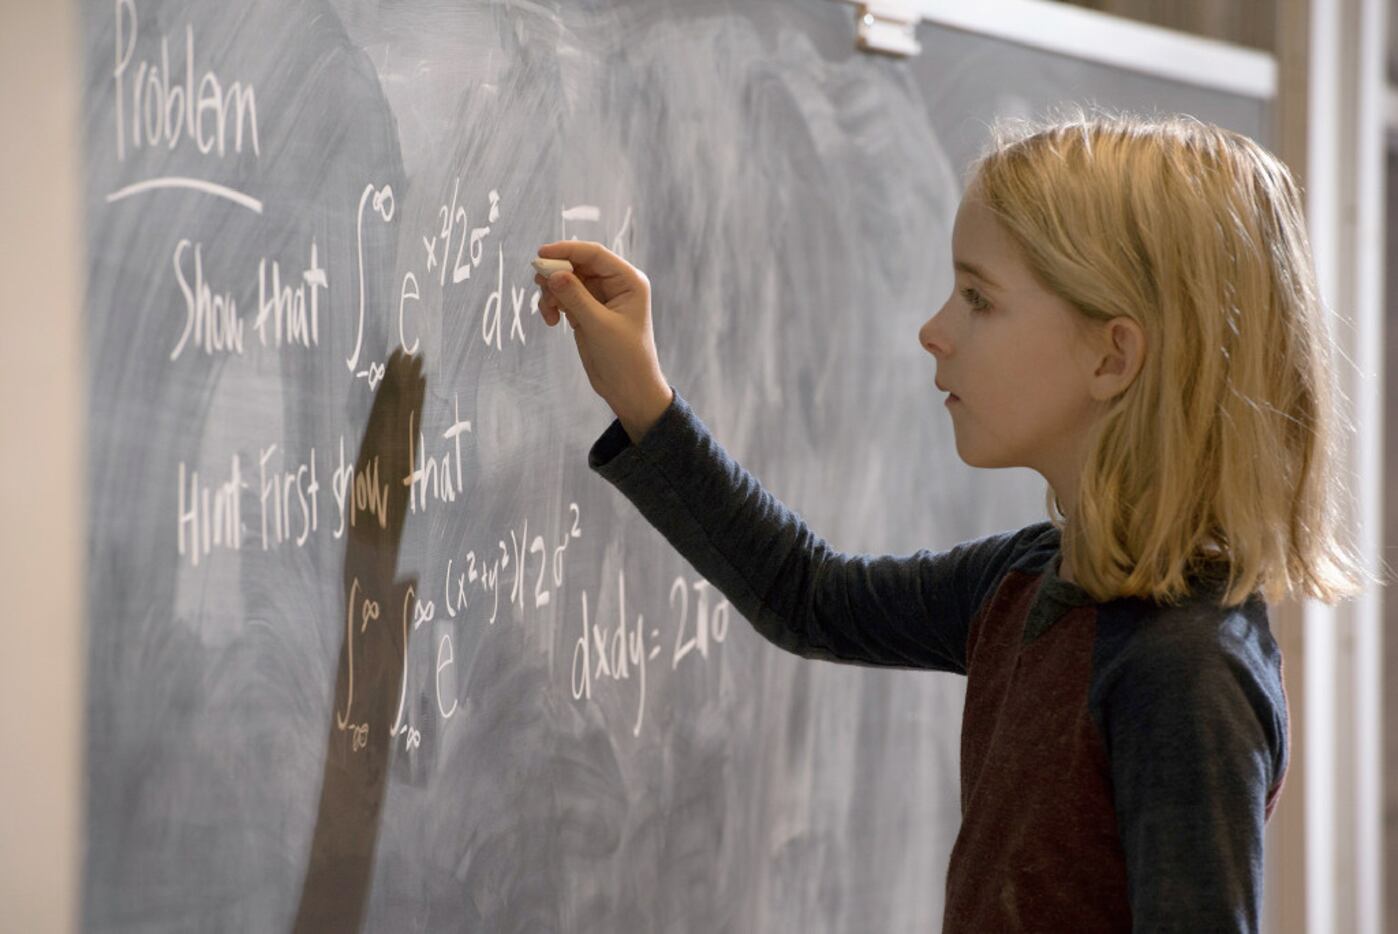 Ten-year-old Mckenna Grace is an actress who plays a math genius in the new movie "Gifted." 